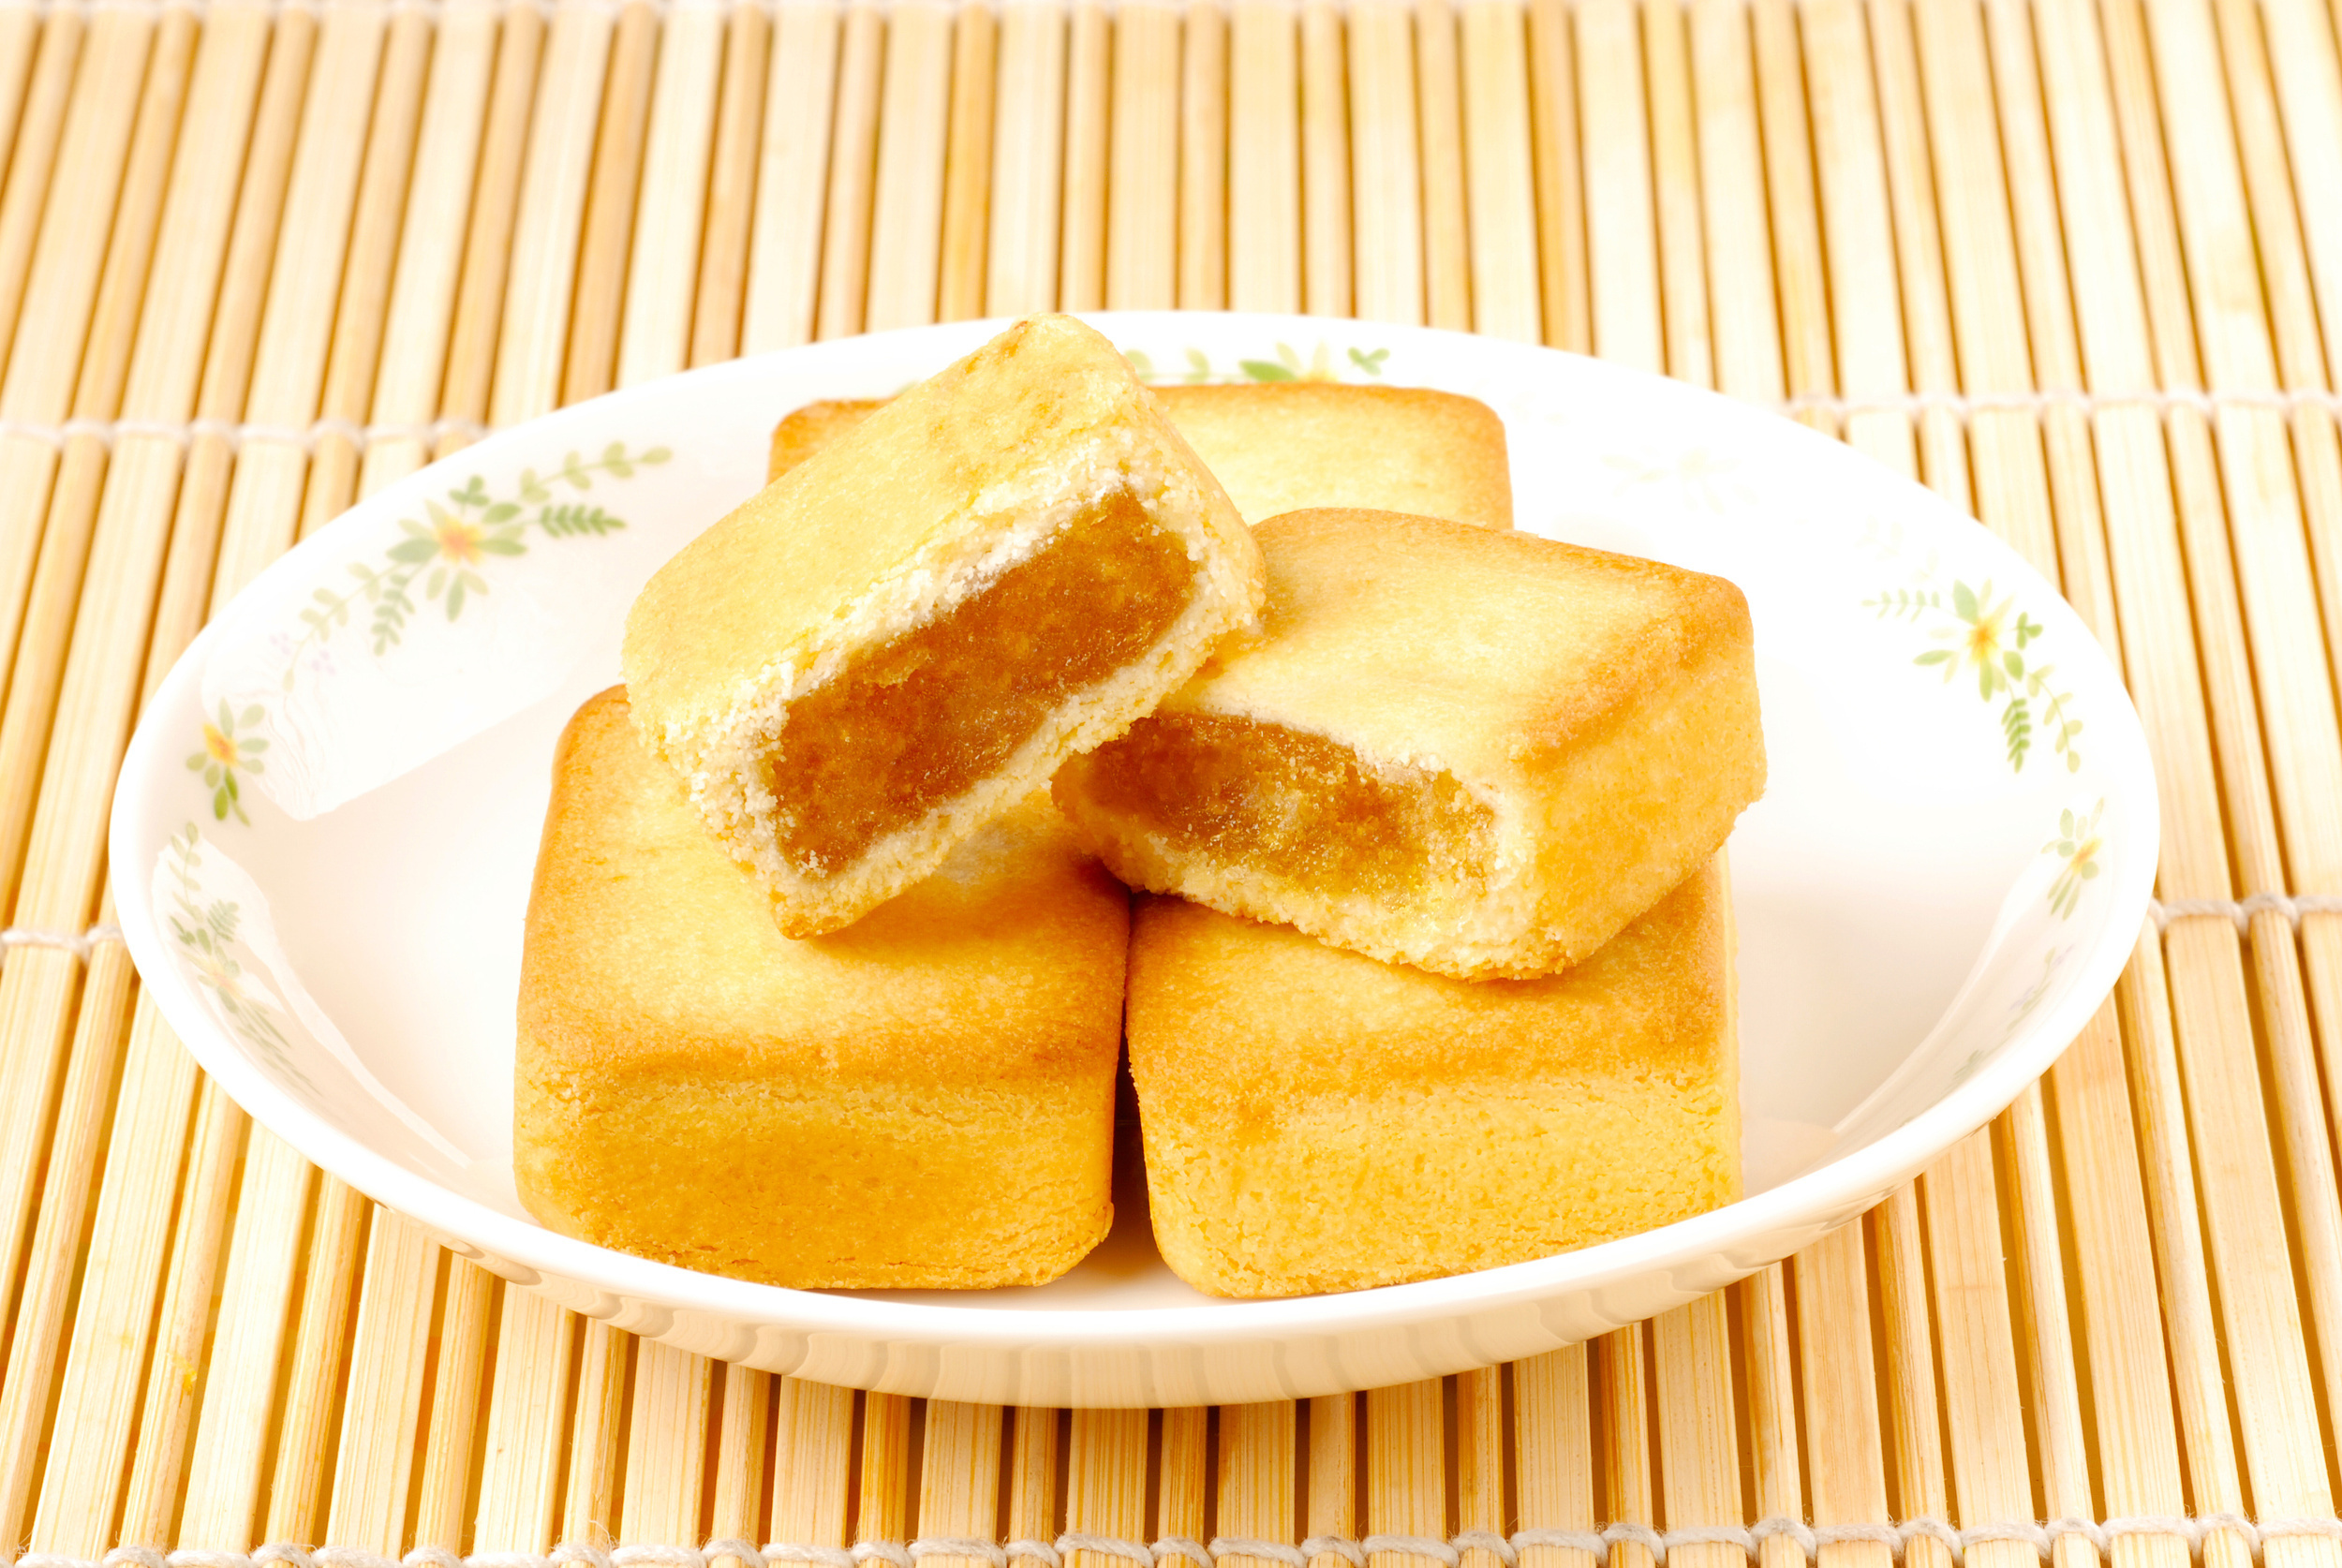 <p>Just look at these adorable little pineapple cakes from Taiwan! Known as <em>fènglísū</em> locally, they have a buttery, shortbread-like exterior that’s packed with a dense filling of fresh pineapple — <a href="https://www.kaveyeats.com/an-authentic-taiwanese-pineapple-cake-recipe"><span>this recipe from Kavey Eats</span></a> calls for 3 cups of the fruit!</p><p><a href='https://www.msn.com/en-us/community/channel/vid-cj9pqbr0vn9in2b6ddcd8sfgpfq6x6utp44fssrv6mc2gtybw0us'>Follow us on MSN to see more of our exclusive lifestyle content.</a></p>